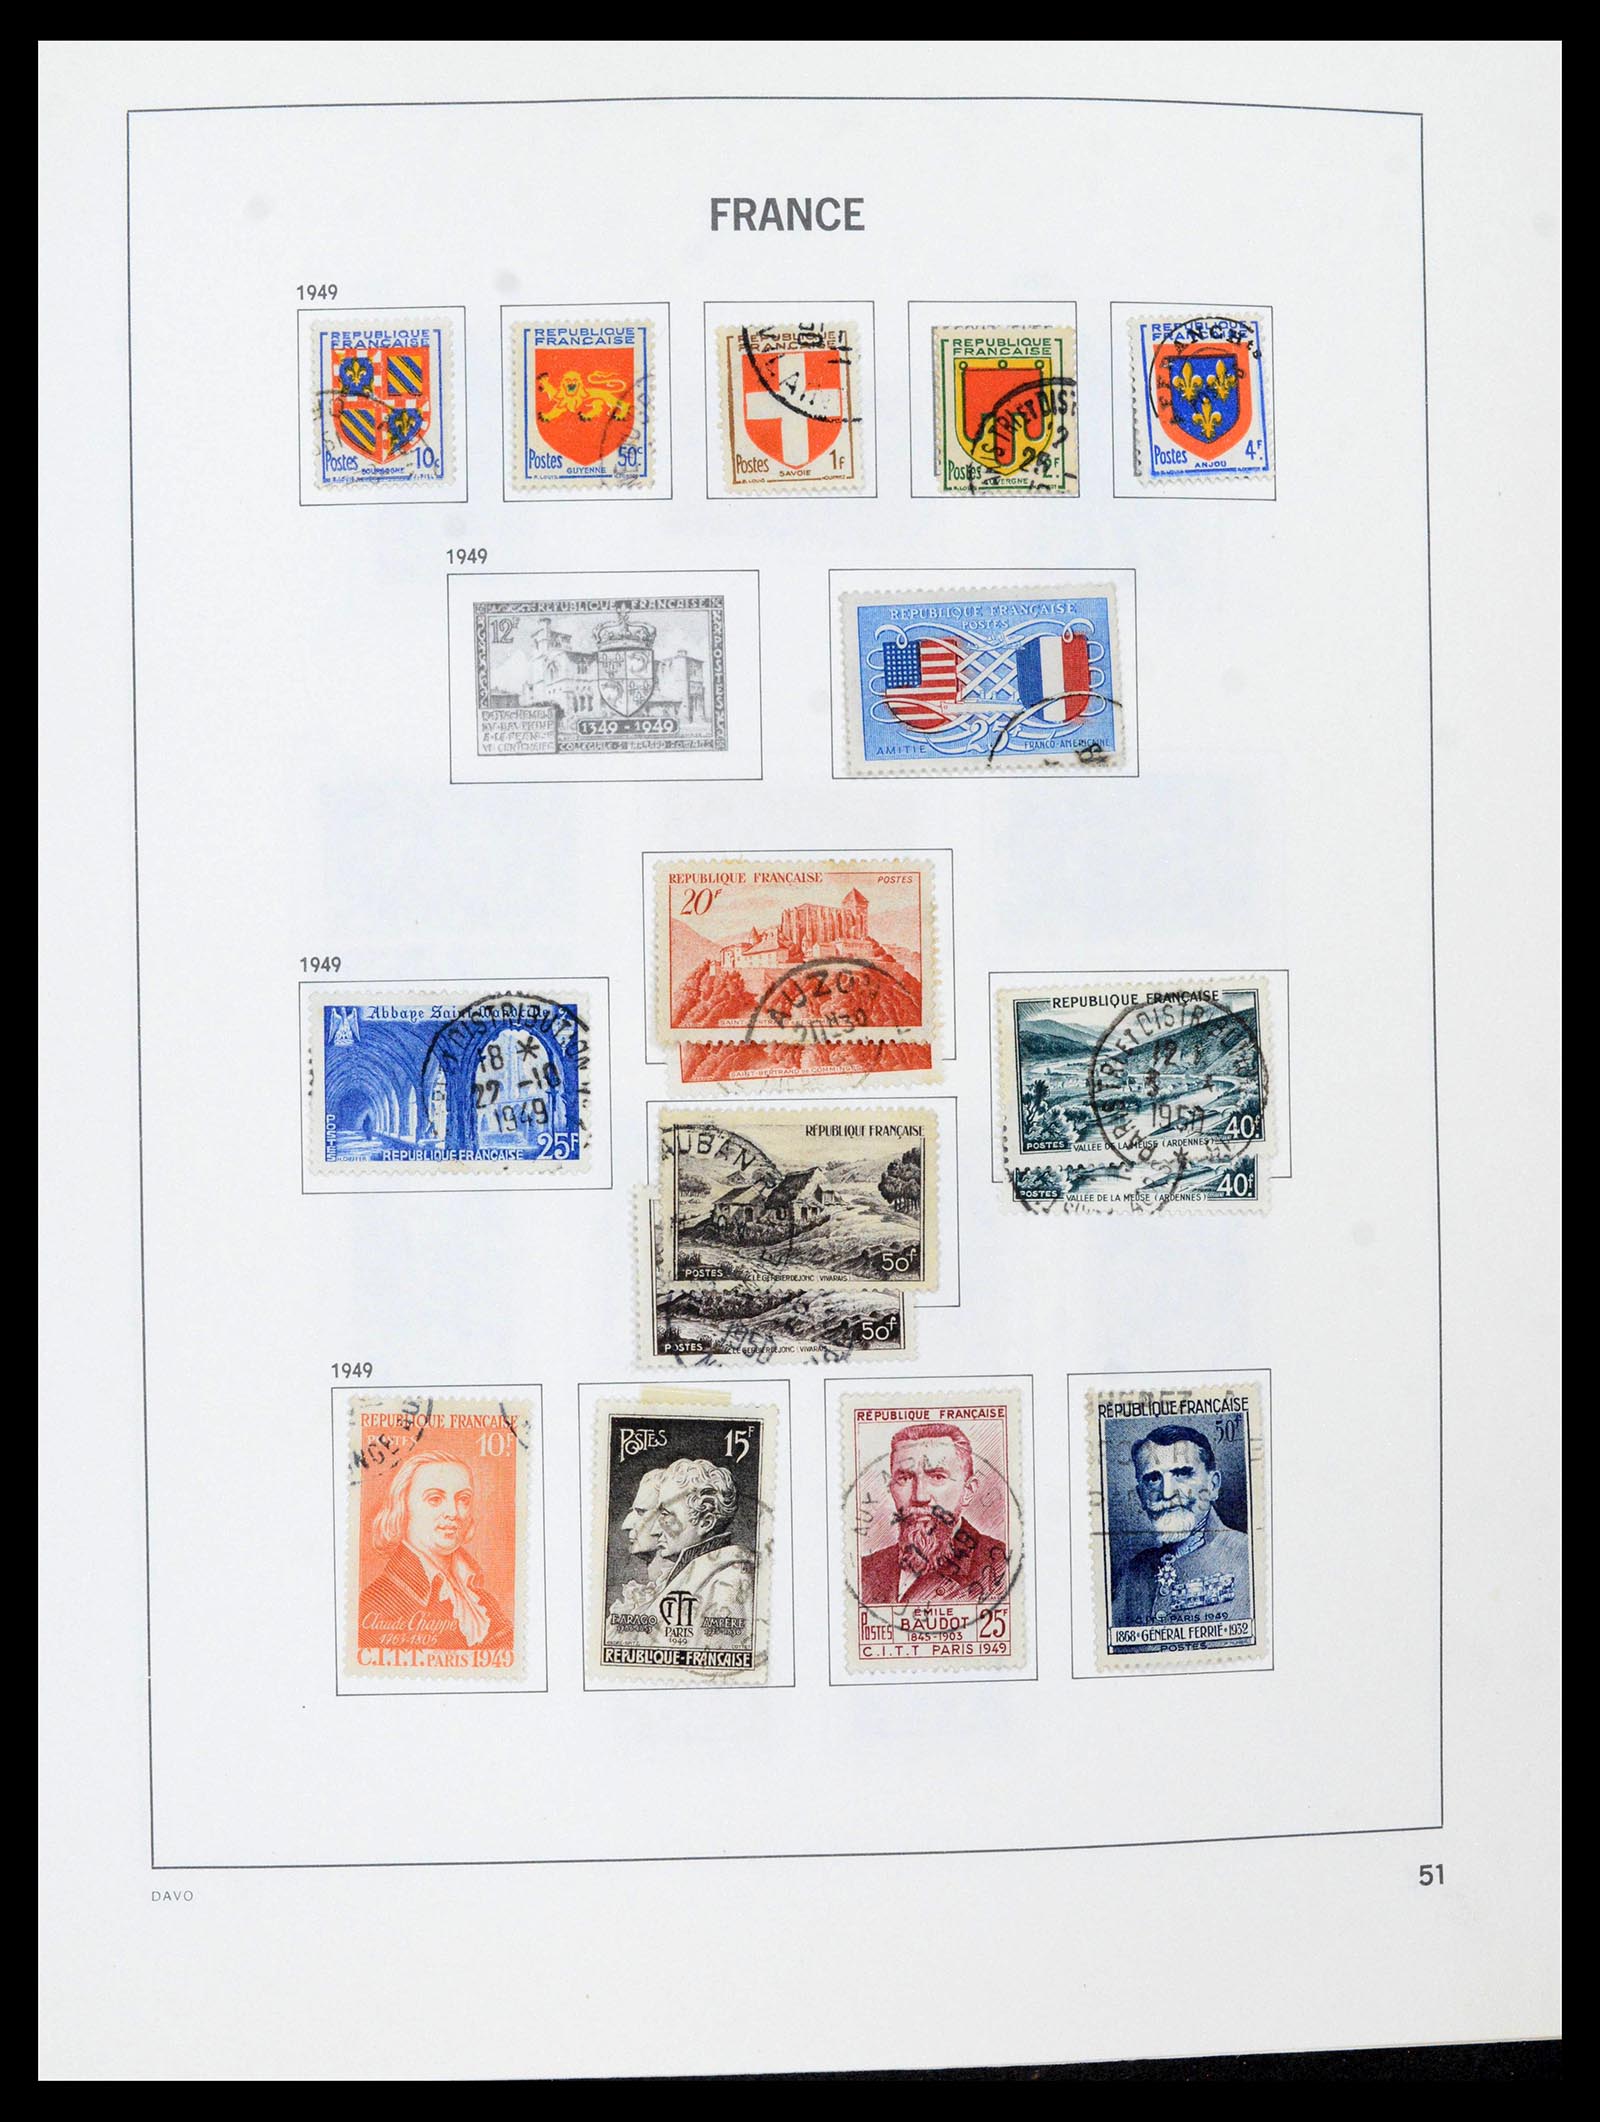 39164 0051 - Stamp collection 39164 France 1849-1981.